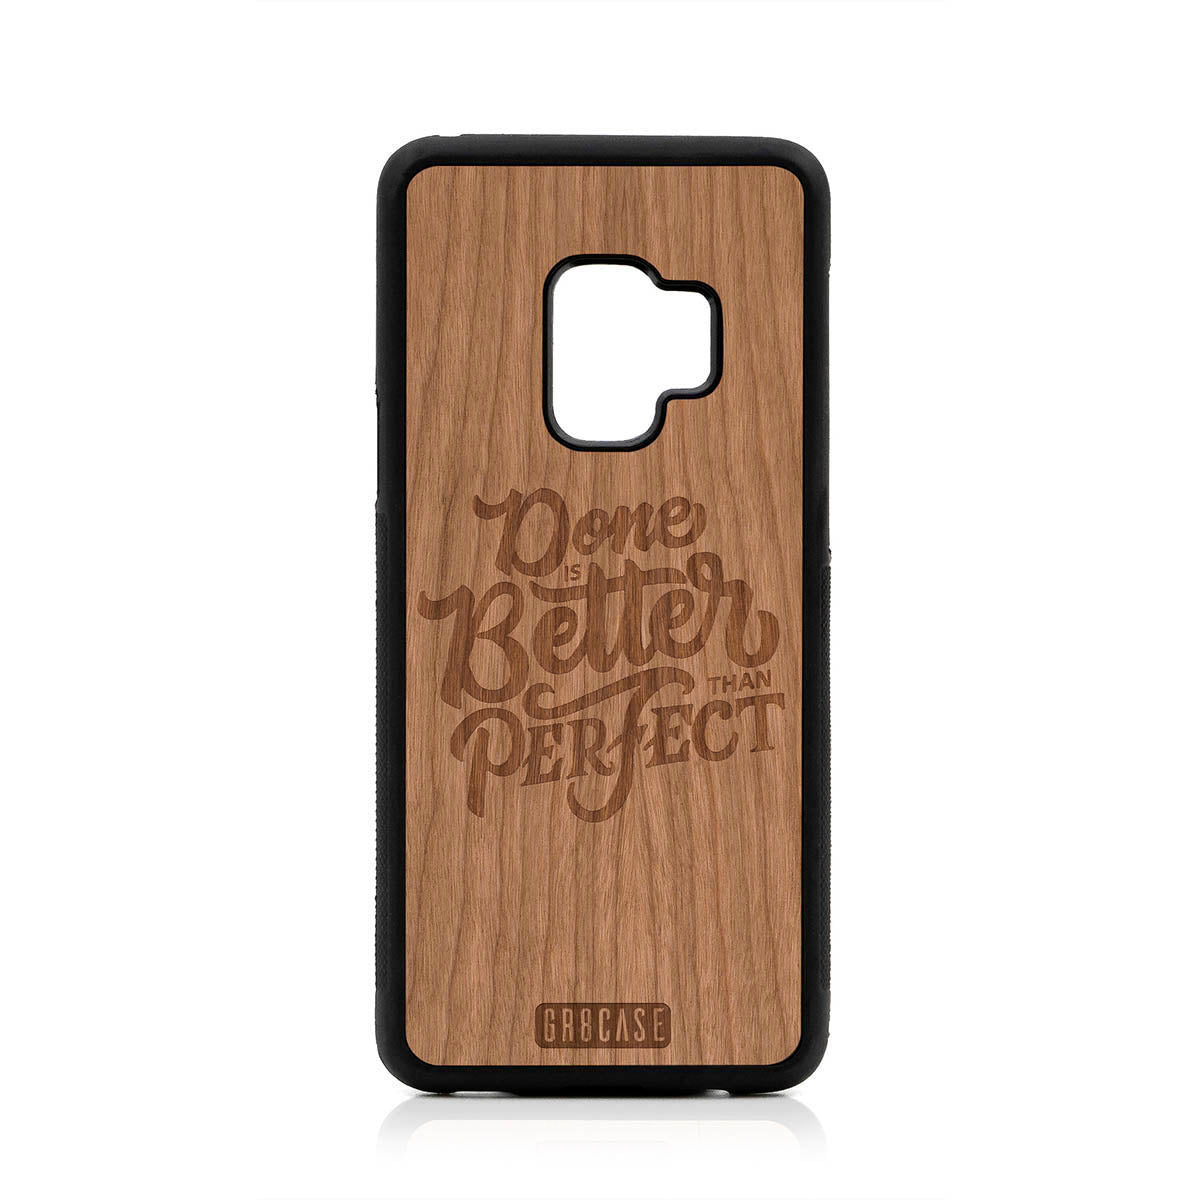 Done Is Better Than Perfect Design Wood Case For Samsung Galaxy S9 by GR8CASE